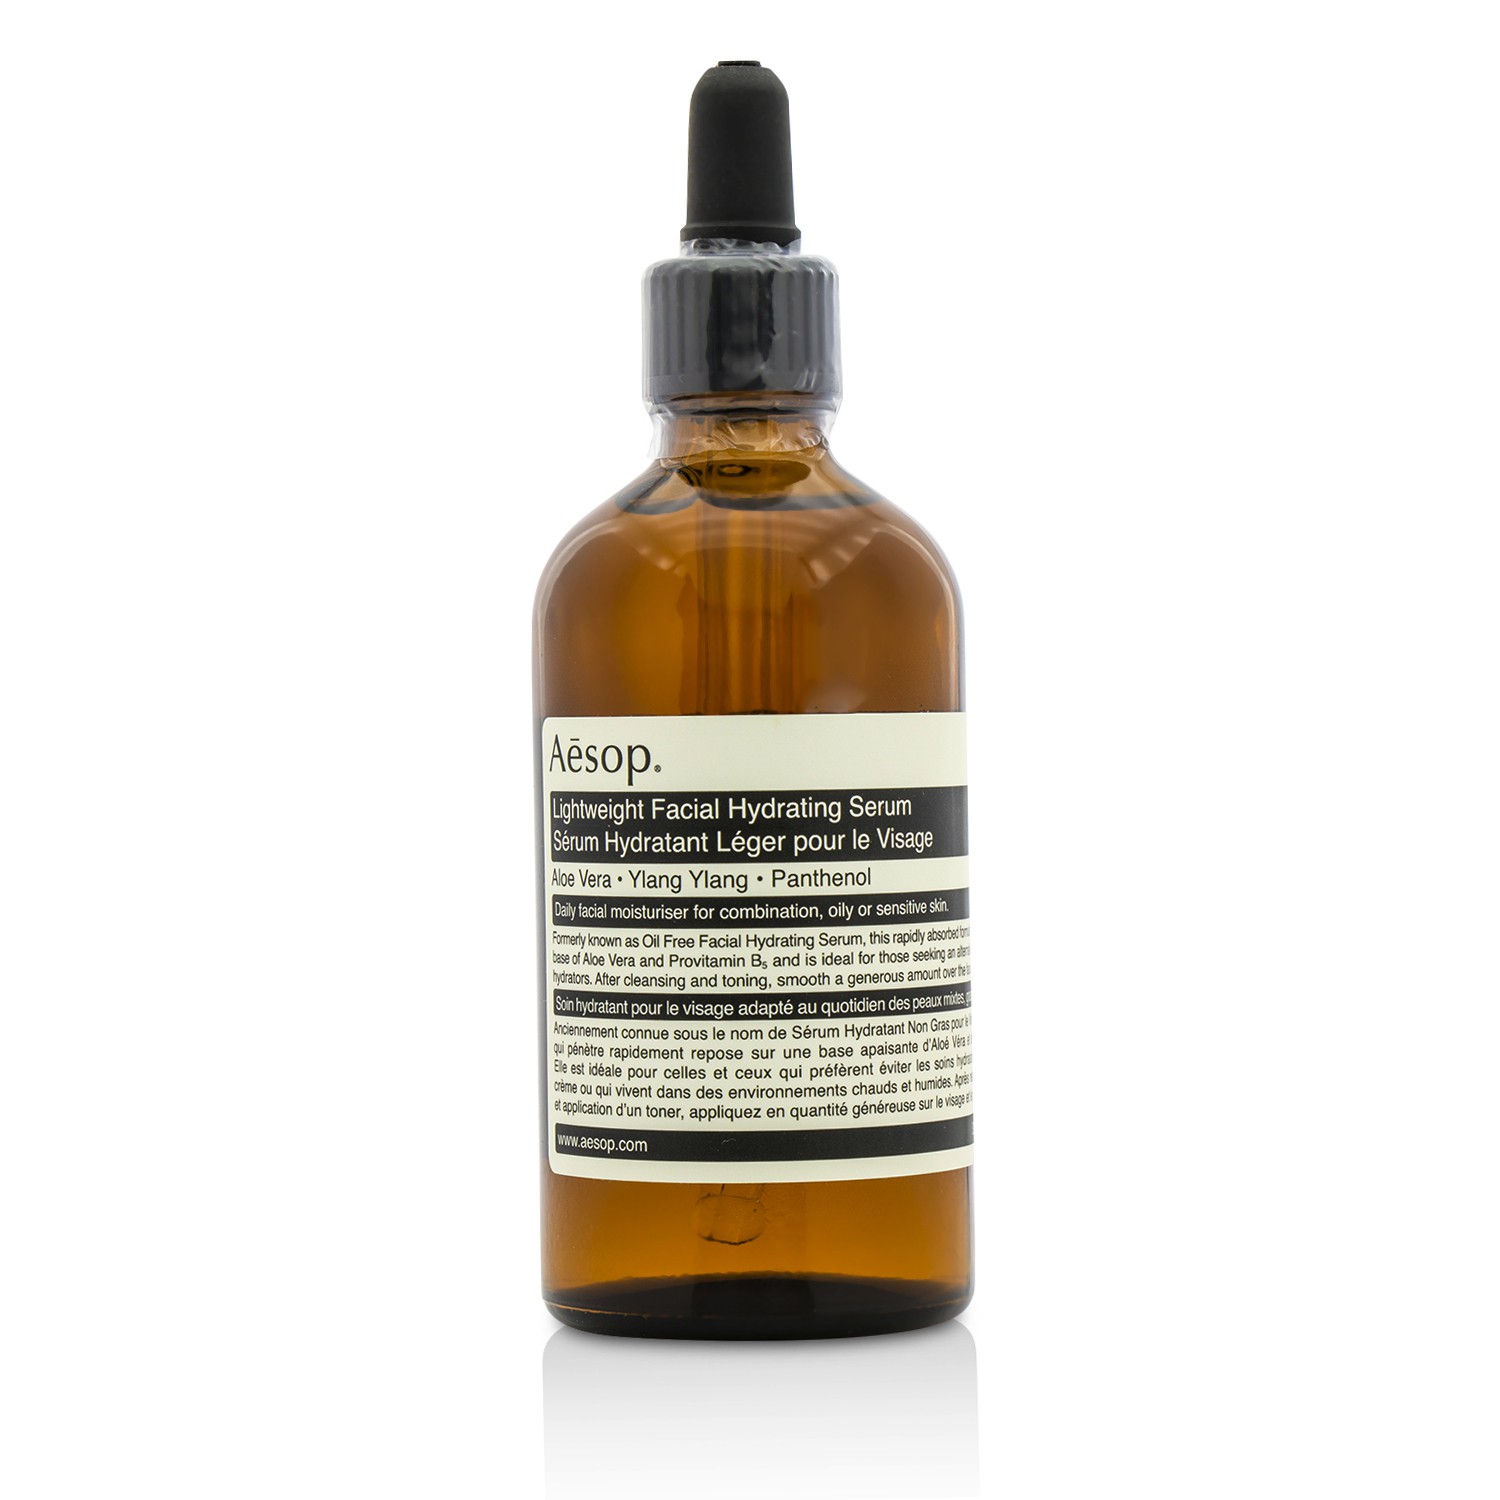 Lightweight Facial Hydrating Serum - For Combination Oily / Sensitive Skin Aesop Image